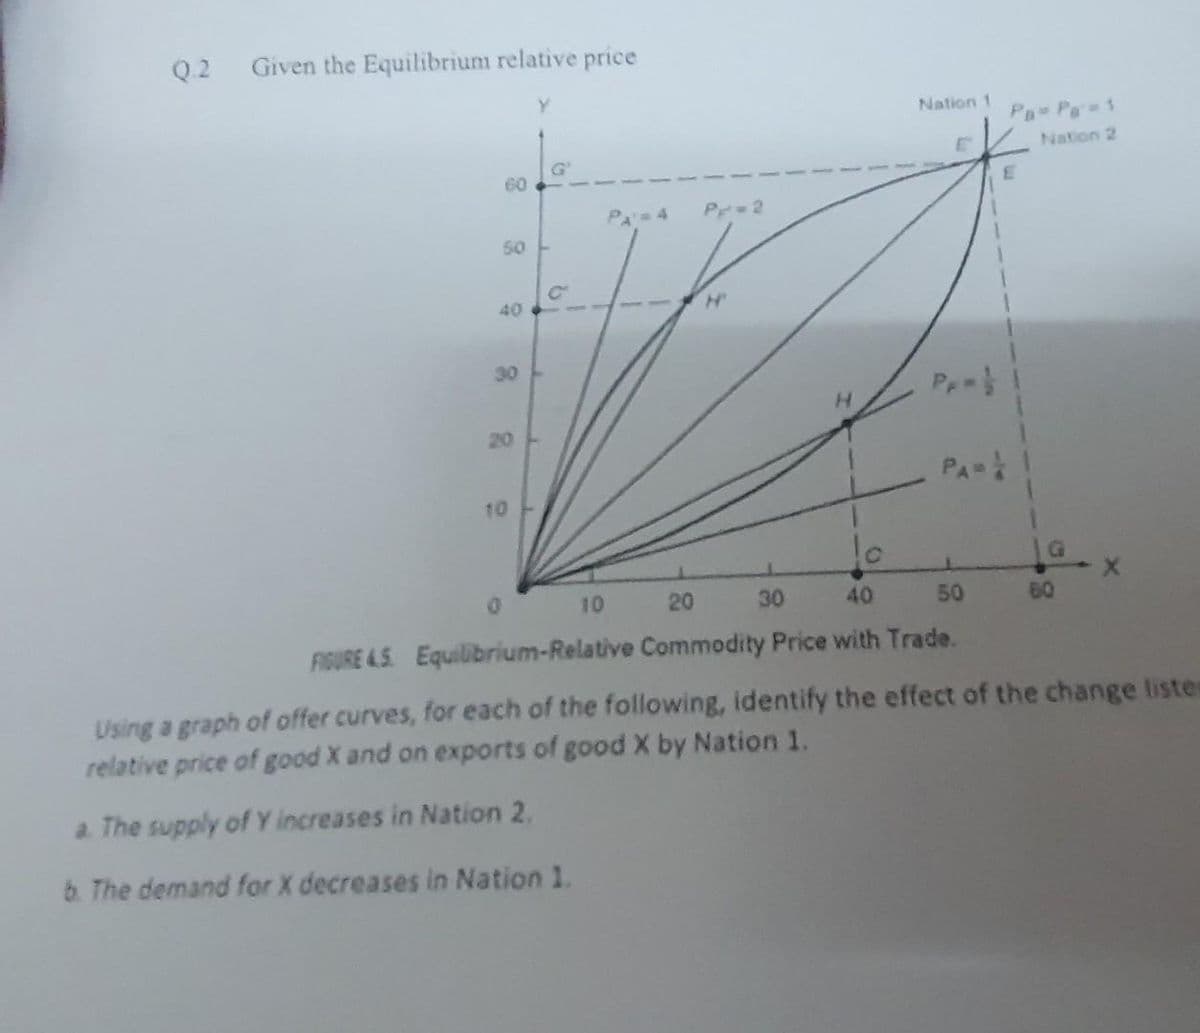 Q.2
Given the Equilibrium relative price
Nation 1
Pa Pa 1
Nation 2
60
PA 4
Pr 2
50 -
40
30
P
20
PA
10
01
10
20
30
40
50
60
FIGURE 4.5 Equilibrium-Relative Commodity Price with Trade.
Using a graph of offer curves, for each of the following, identify the effect of the change listes
relative price of good X and on exports of good X by Nation 1.
a. The supply ofY increases in Nation 2.
6. The demand for X decreases in Nation 1.
